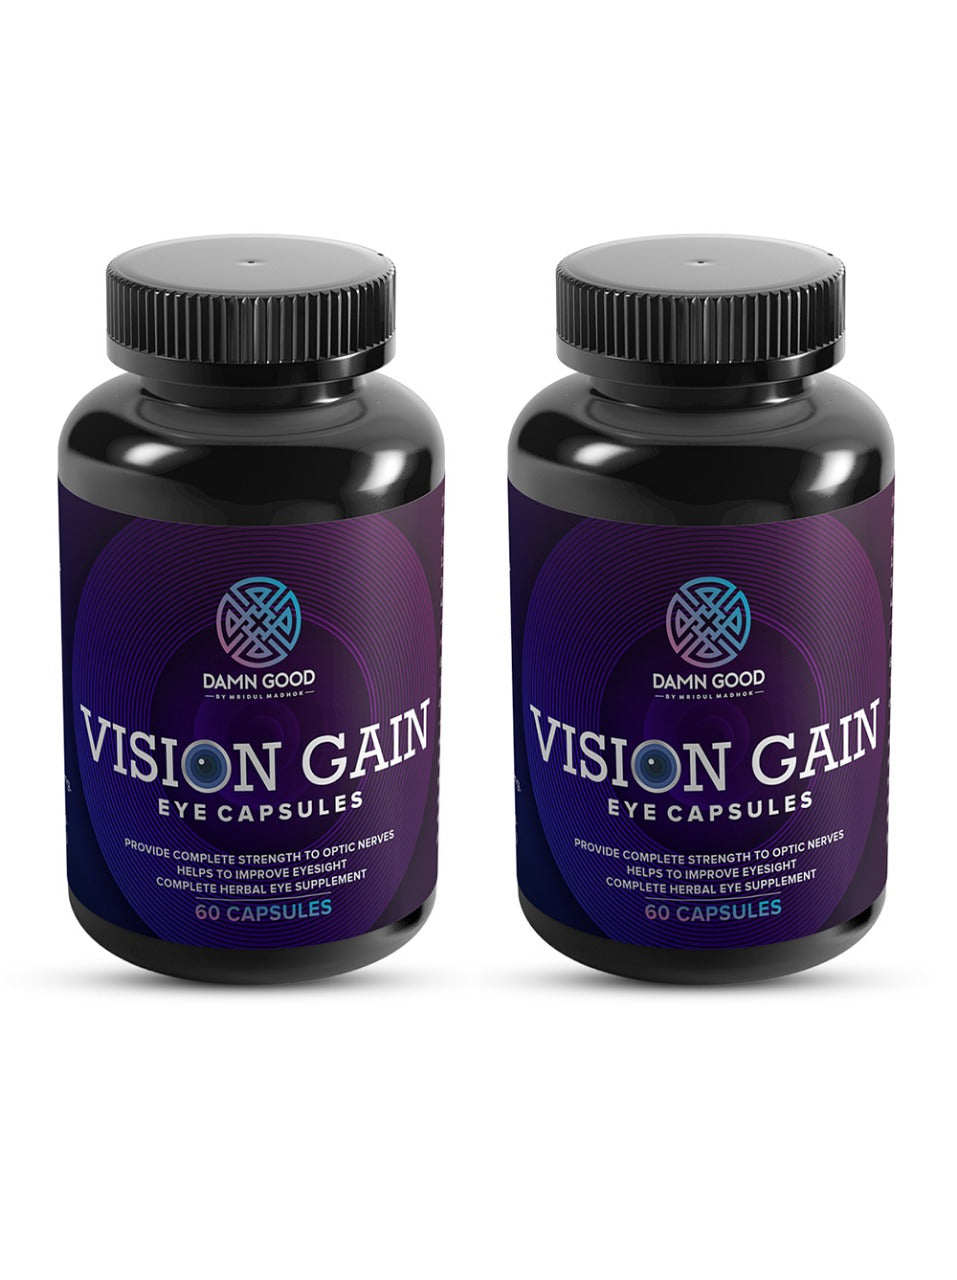 Damngood Vision Gain -Improve Your Eyesight -120 caps (Pack of 2)